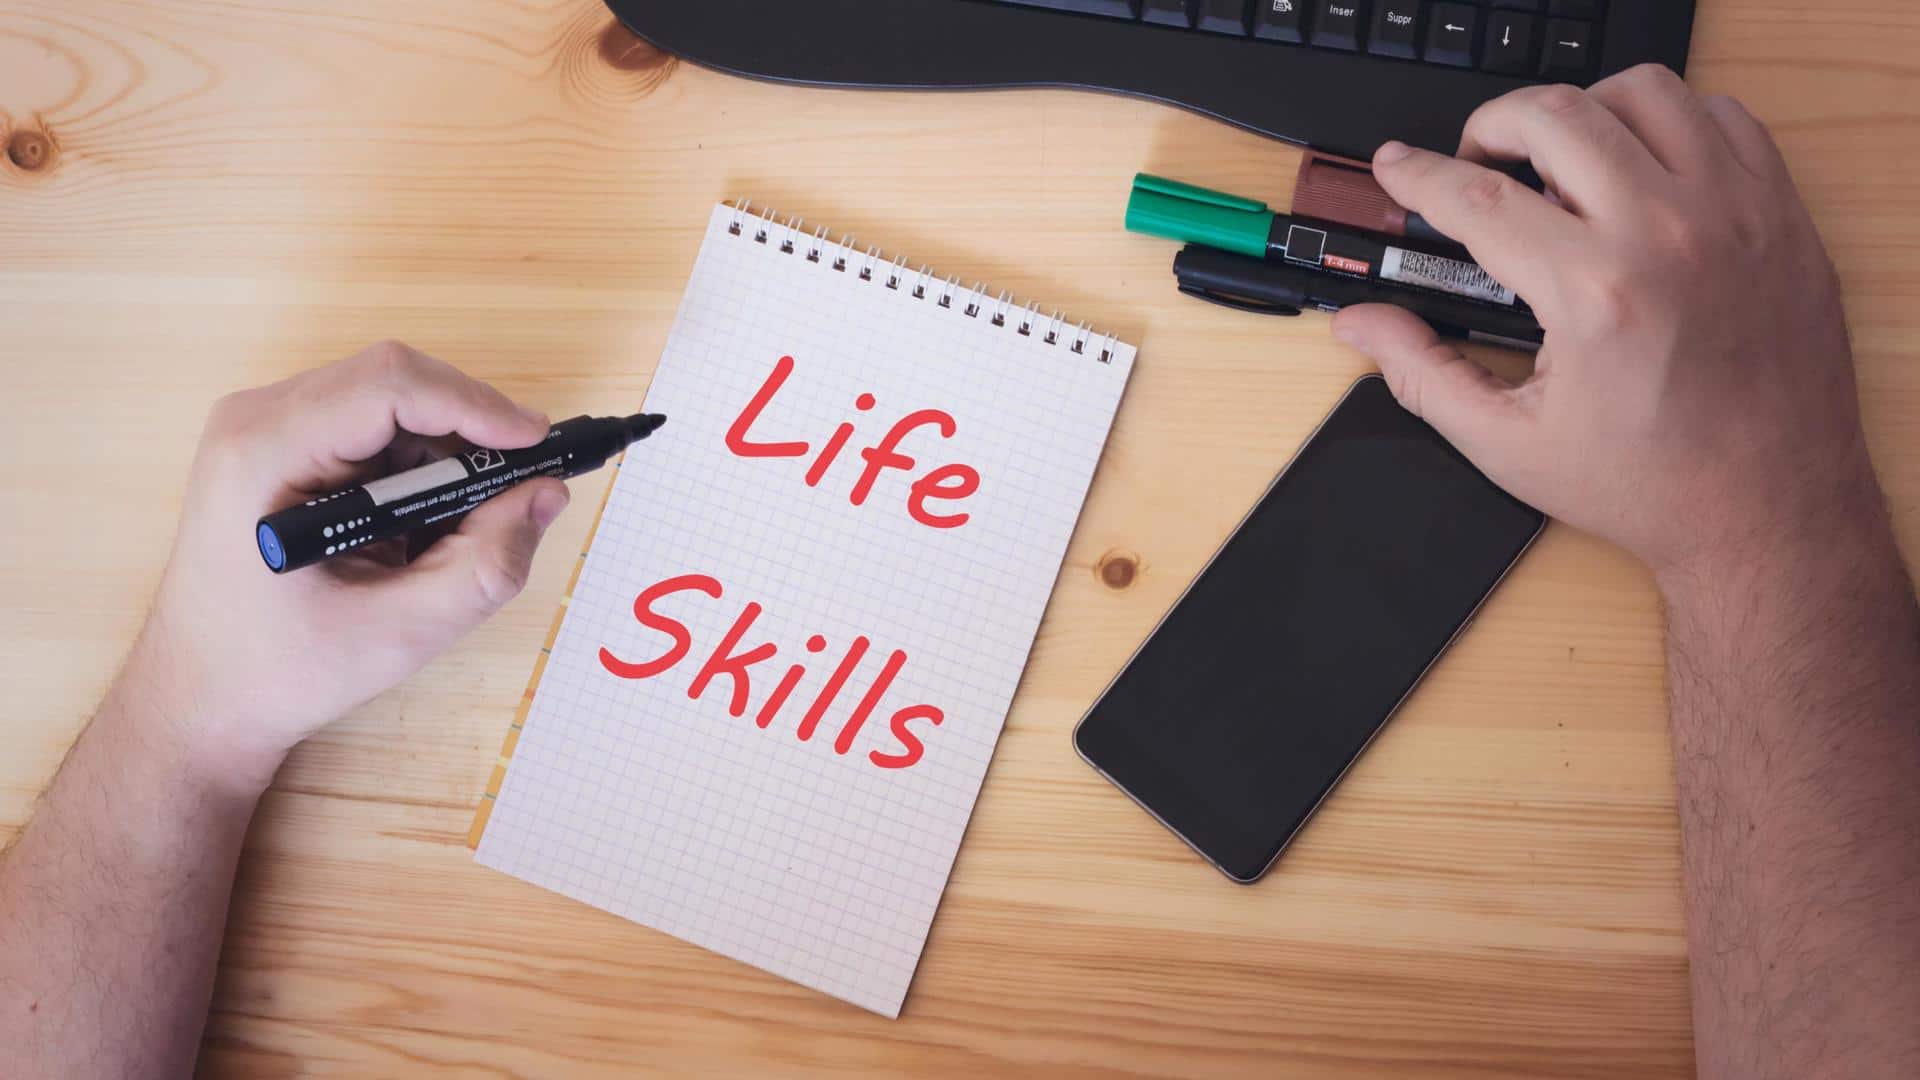 Life skills you should master before you turn 30